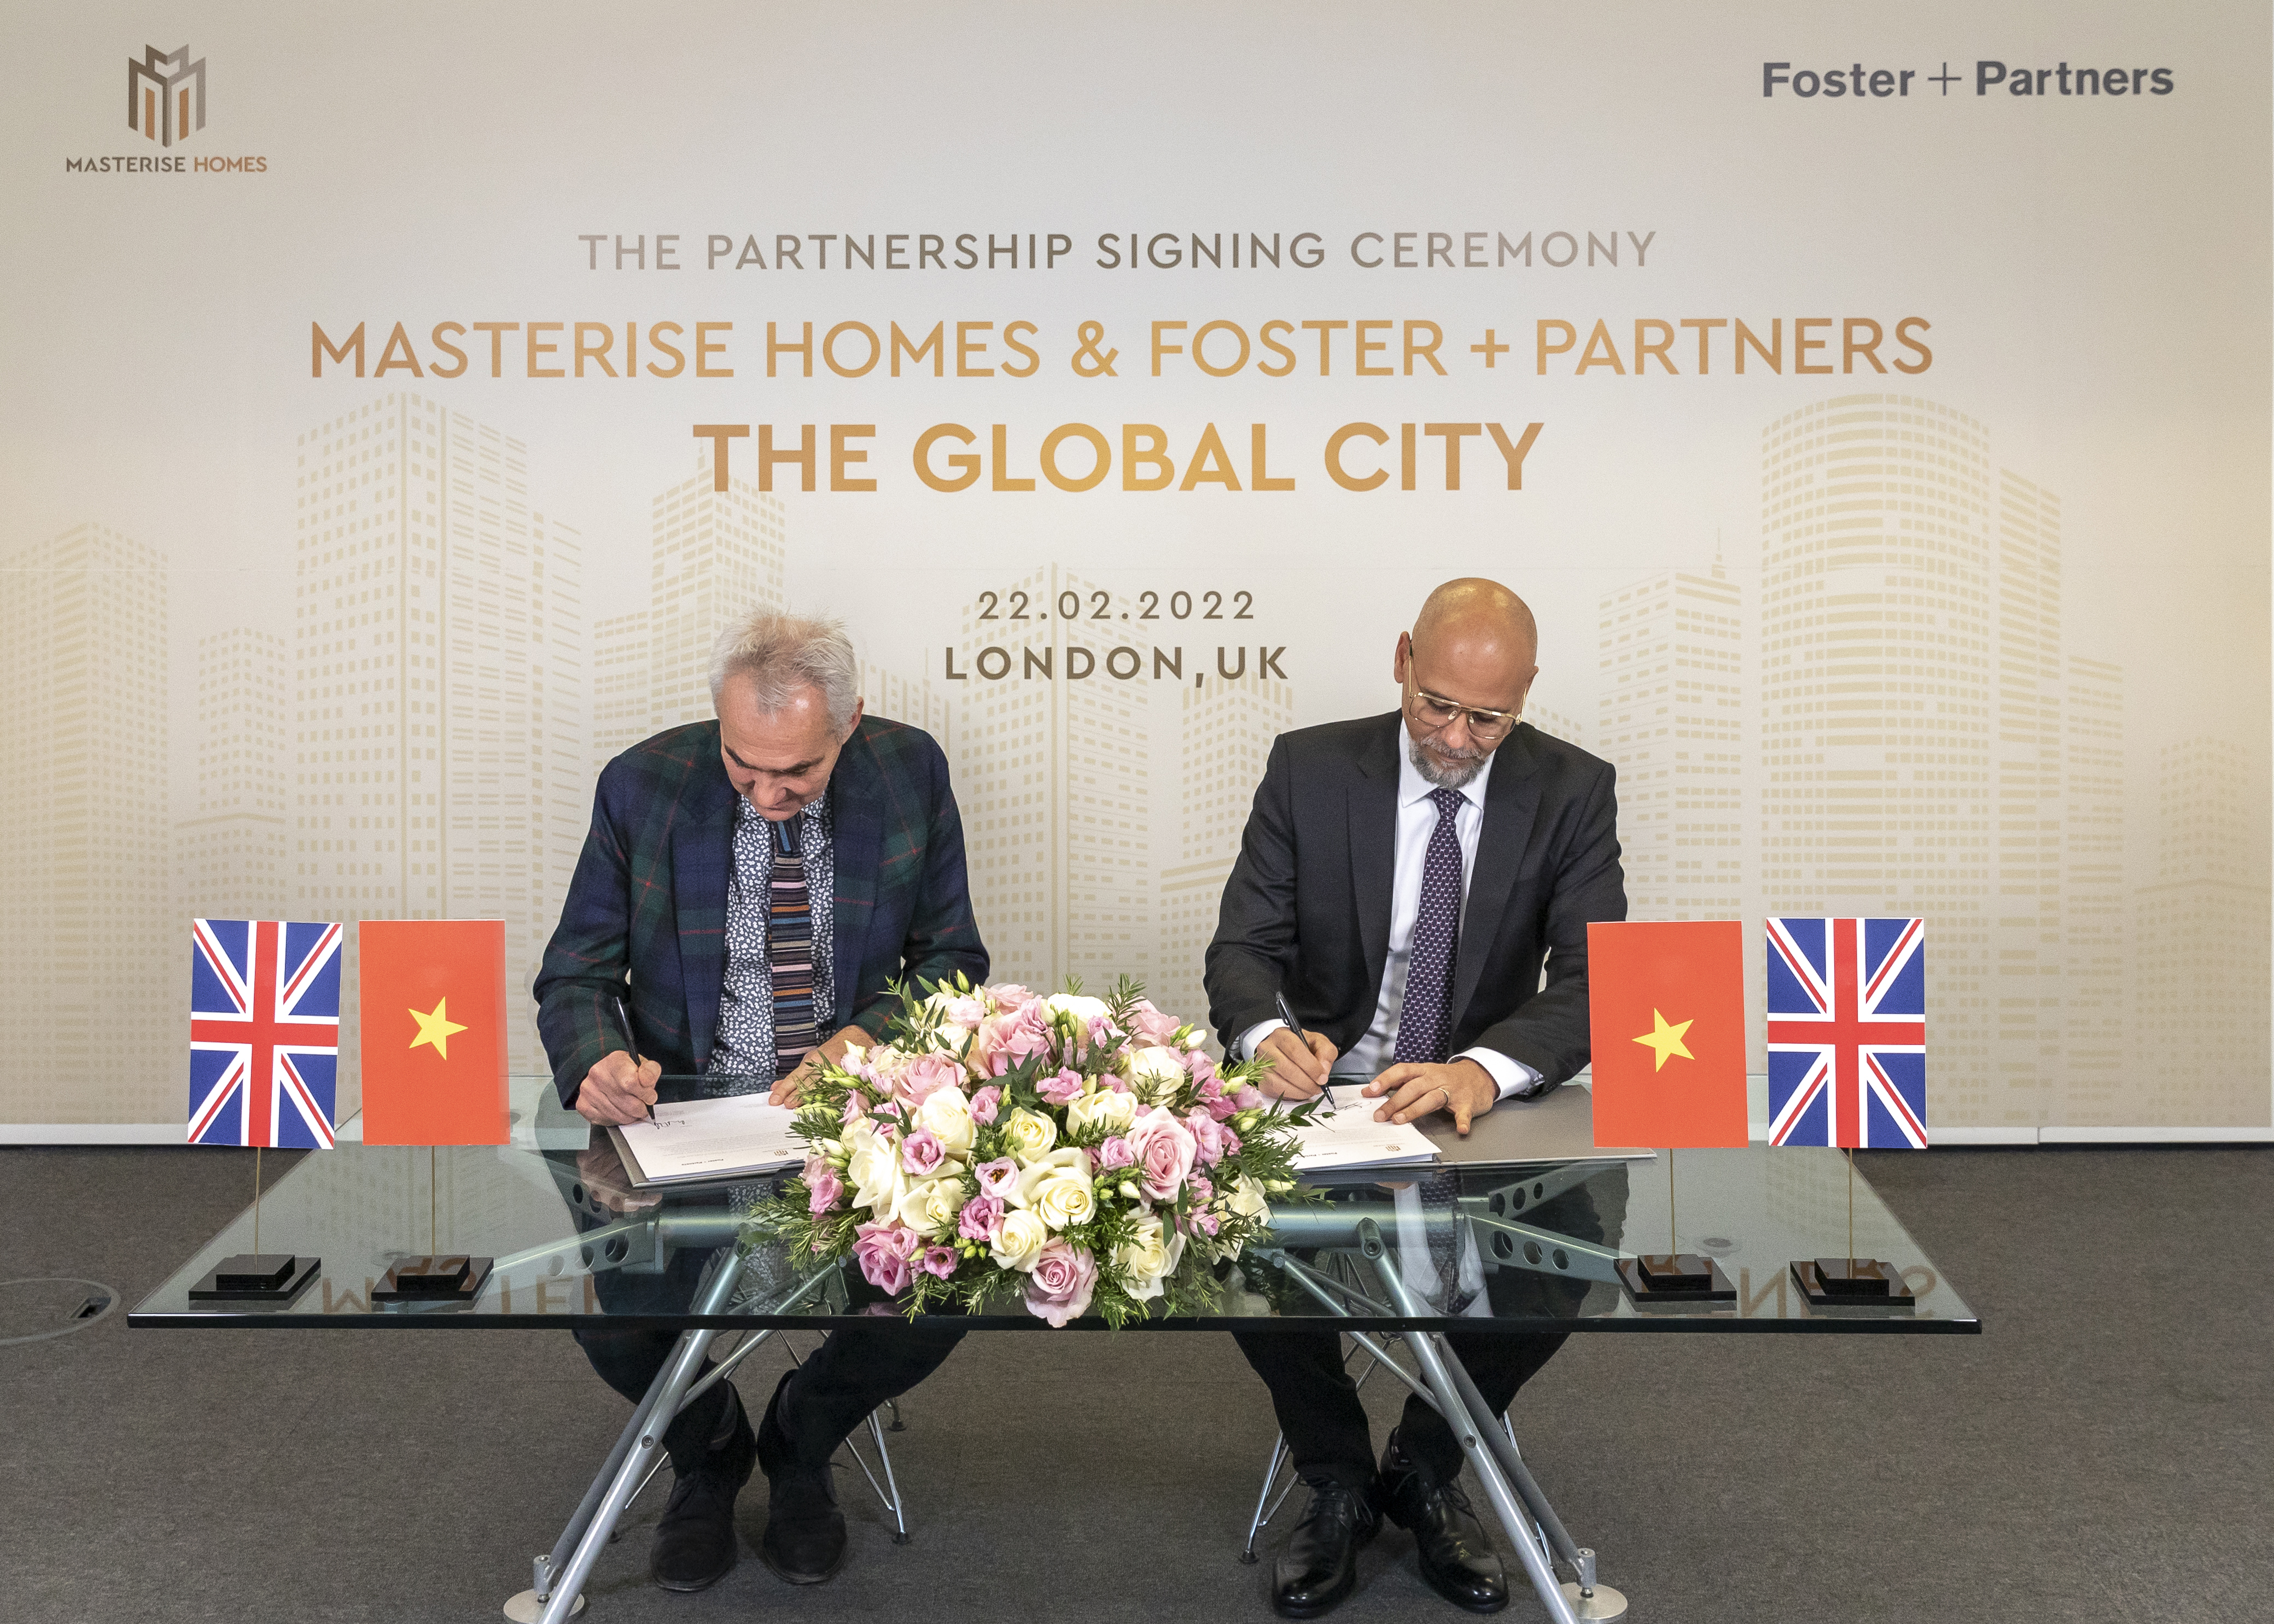 The natural synergy with Foster + Partners is aligned with Masterise Homes’ commitment to creating an iconic development with worldwide recognition, contributing to the community and promoting society sustainability.